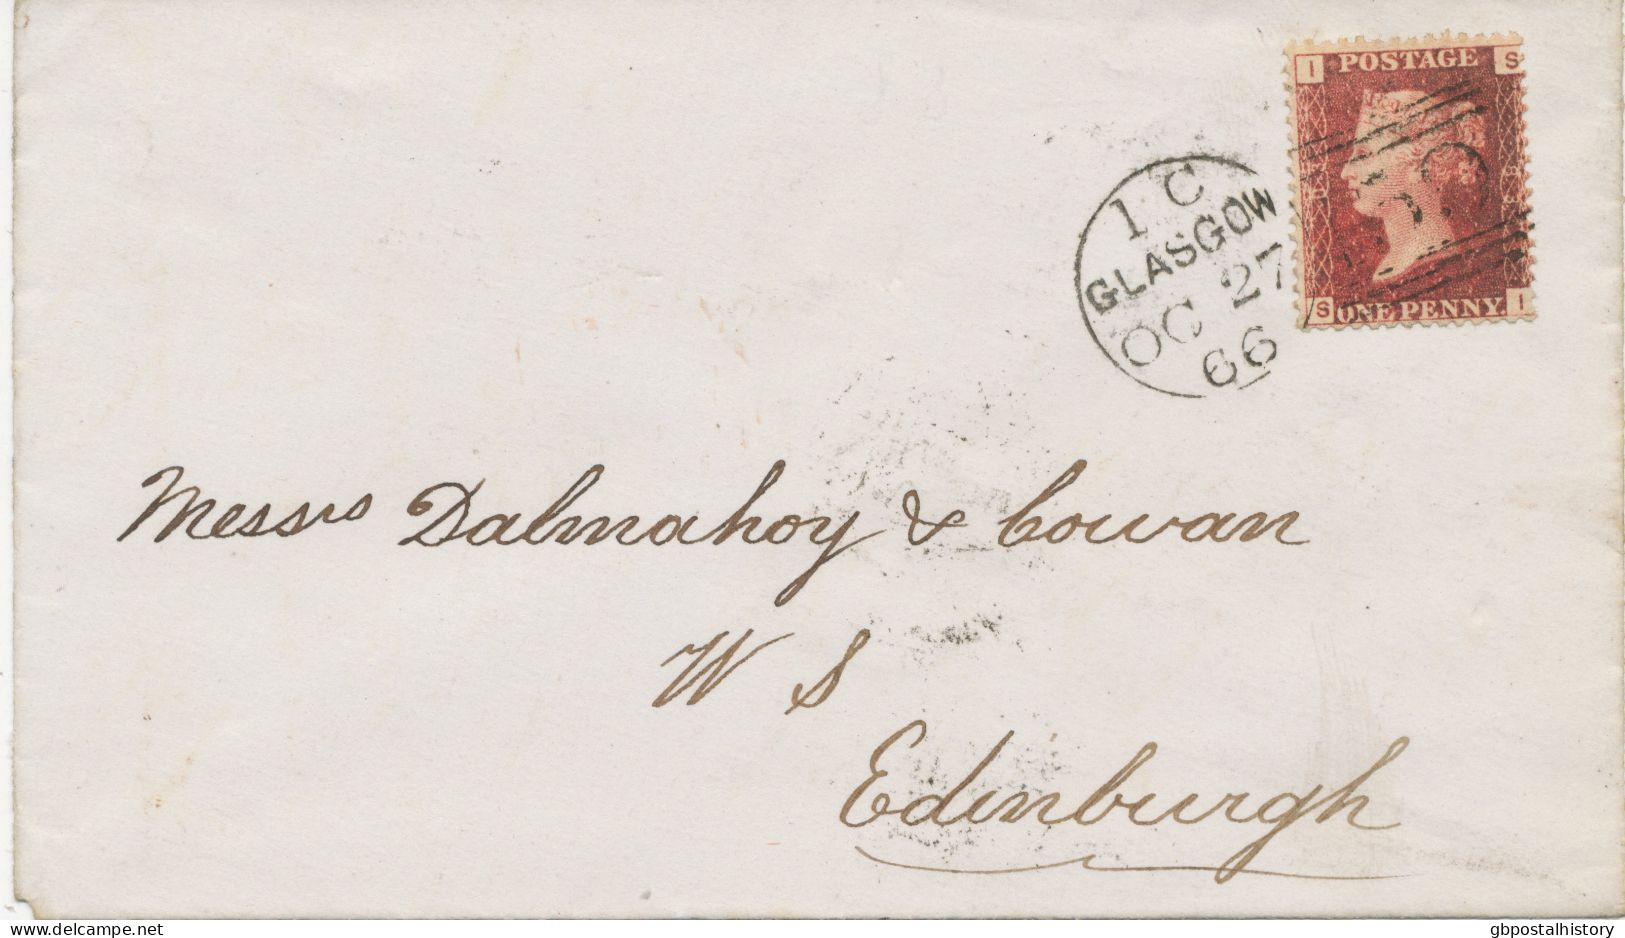 GB „159 / GLASGOW“ Scottish Duplex (6 THIN Bars With Same Length, Time Code „1 C“, Datepart 20mm) Superb Cover Pl.83 - Covers & Documents